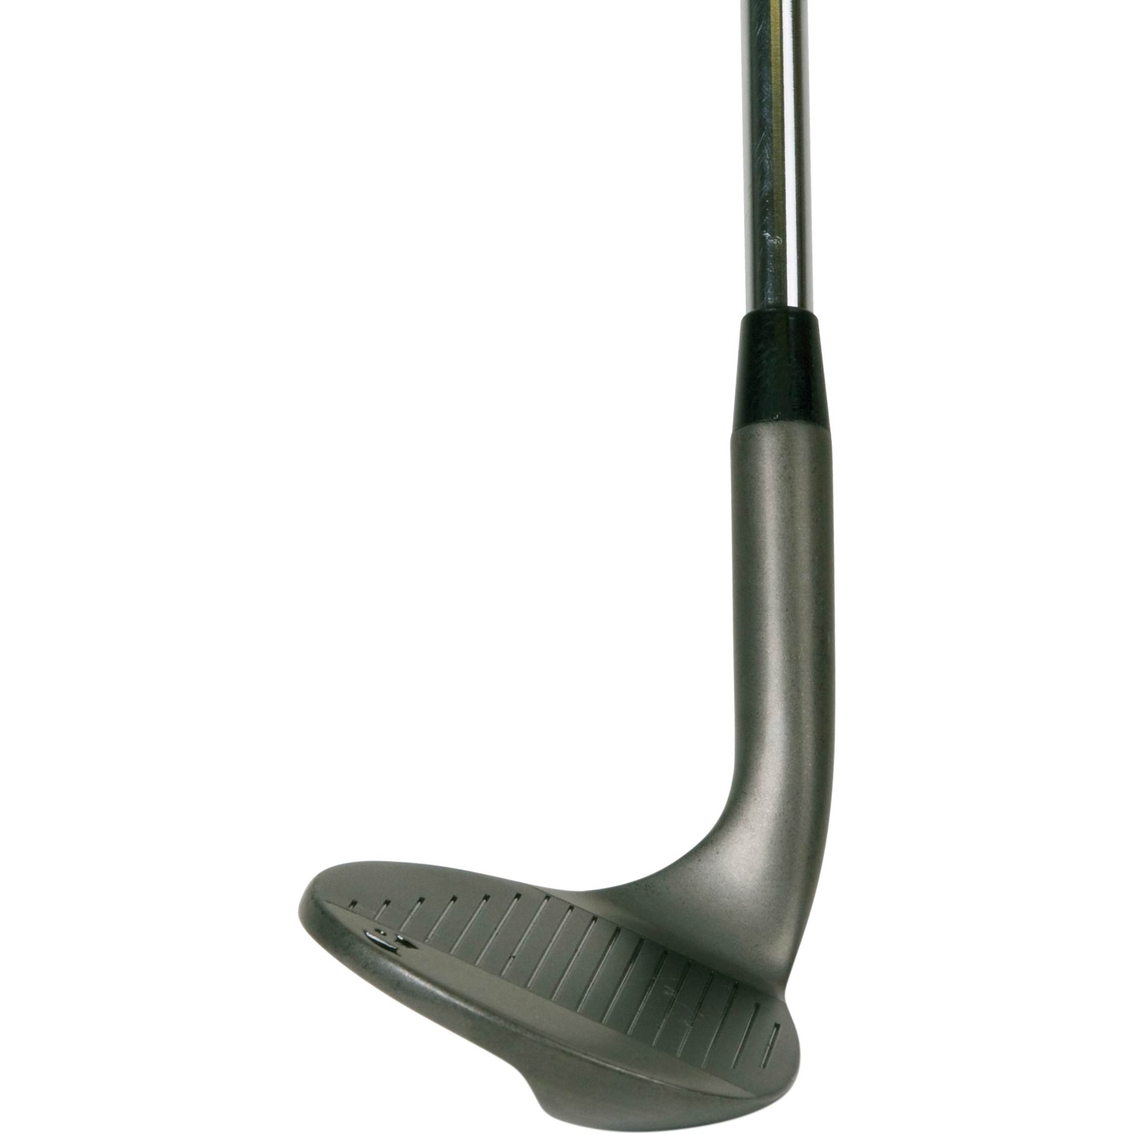 Pinemeadow Golf 64 Degree Wedge - Image 3 of 3